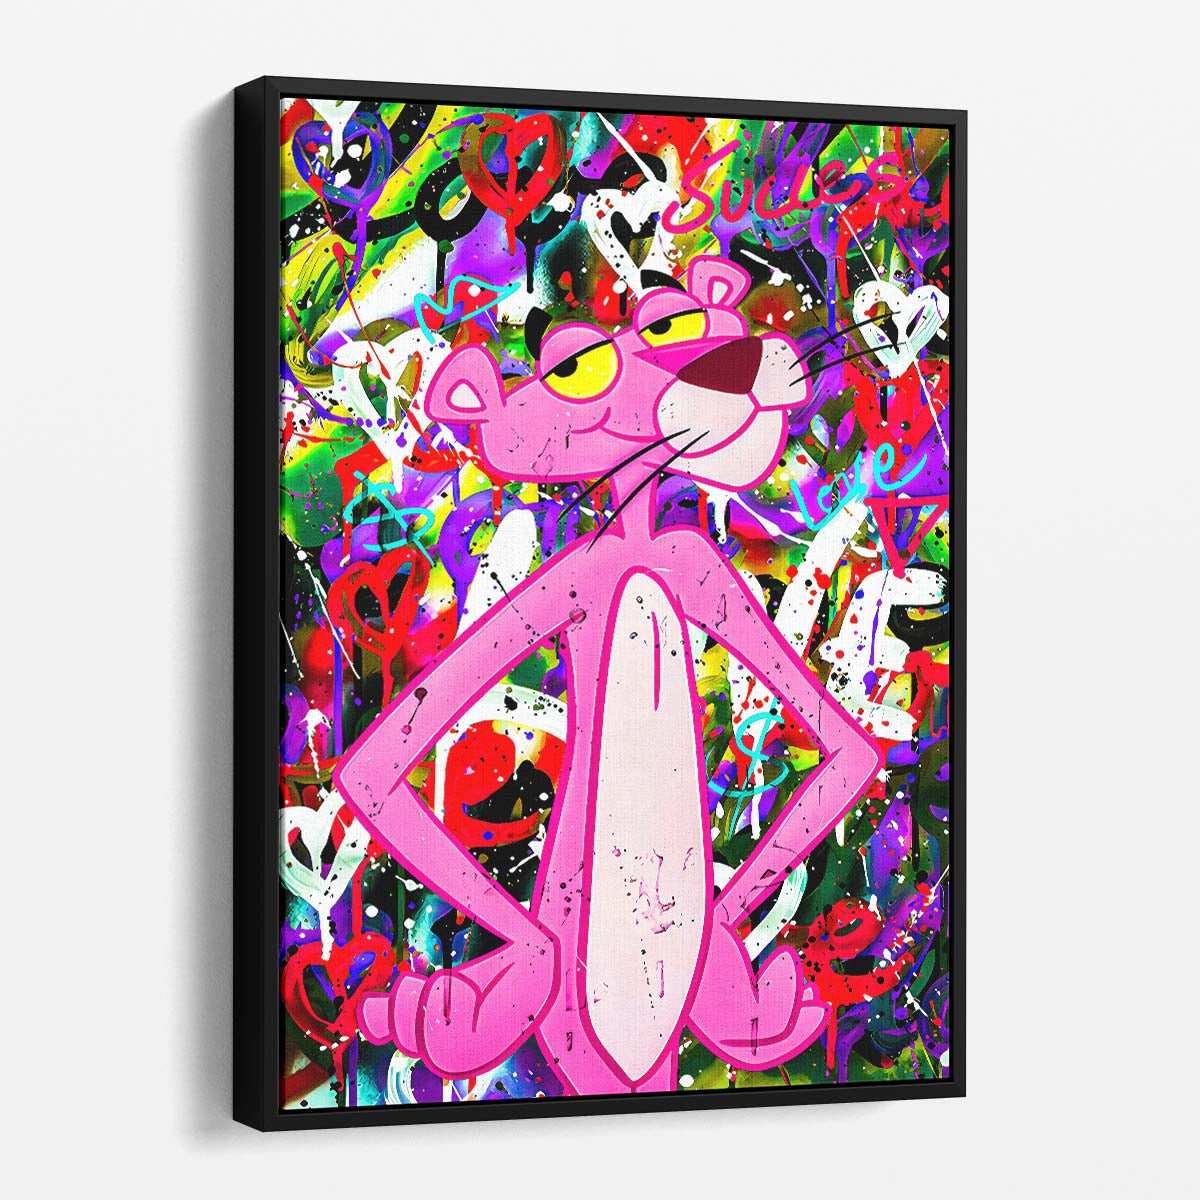 Retro Pink Panther Graffiti Wall Art by Luxuriance Designs. Made in USA.